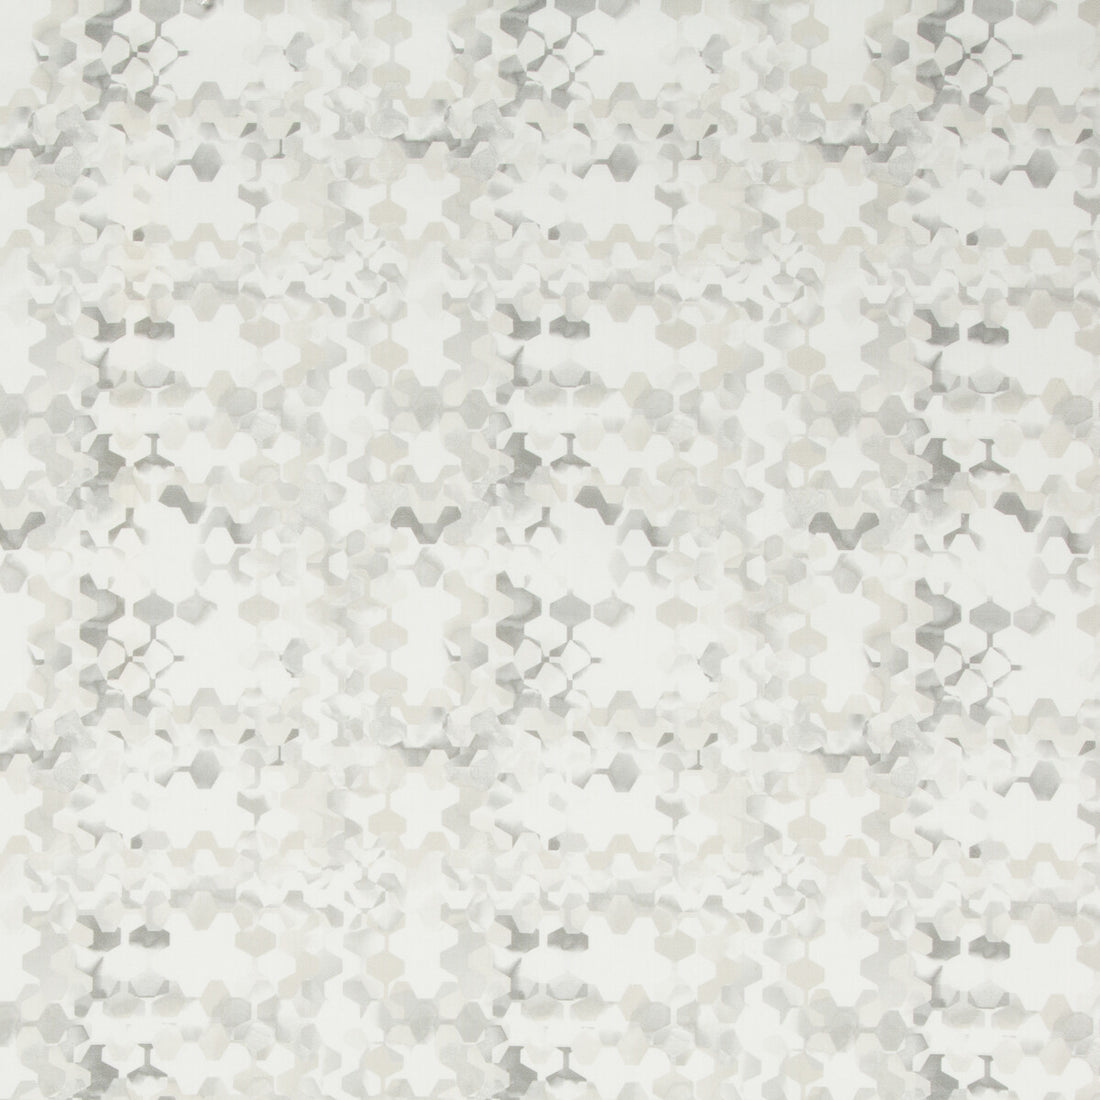 Overshadow fabric in dove color - pattern OVERSHADOW.1611.0 - by Kravet Basics in the Thom Filicia Altitude collection